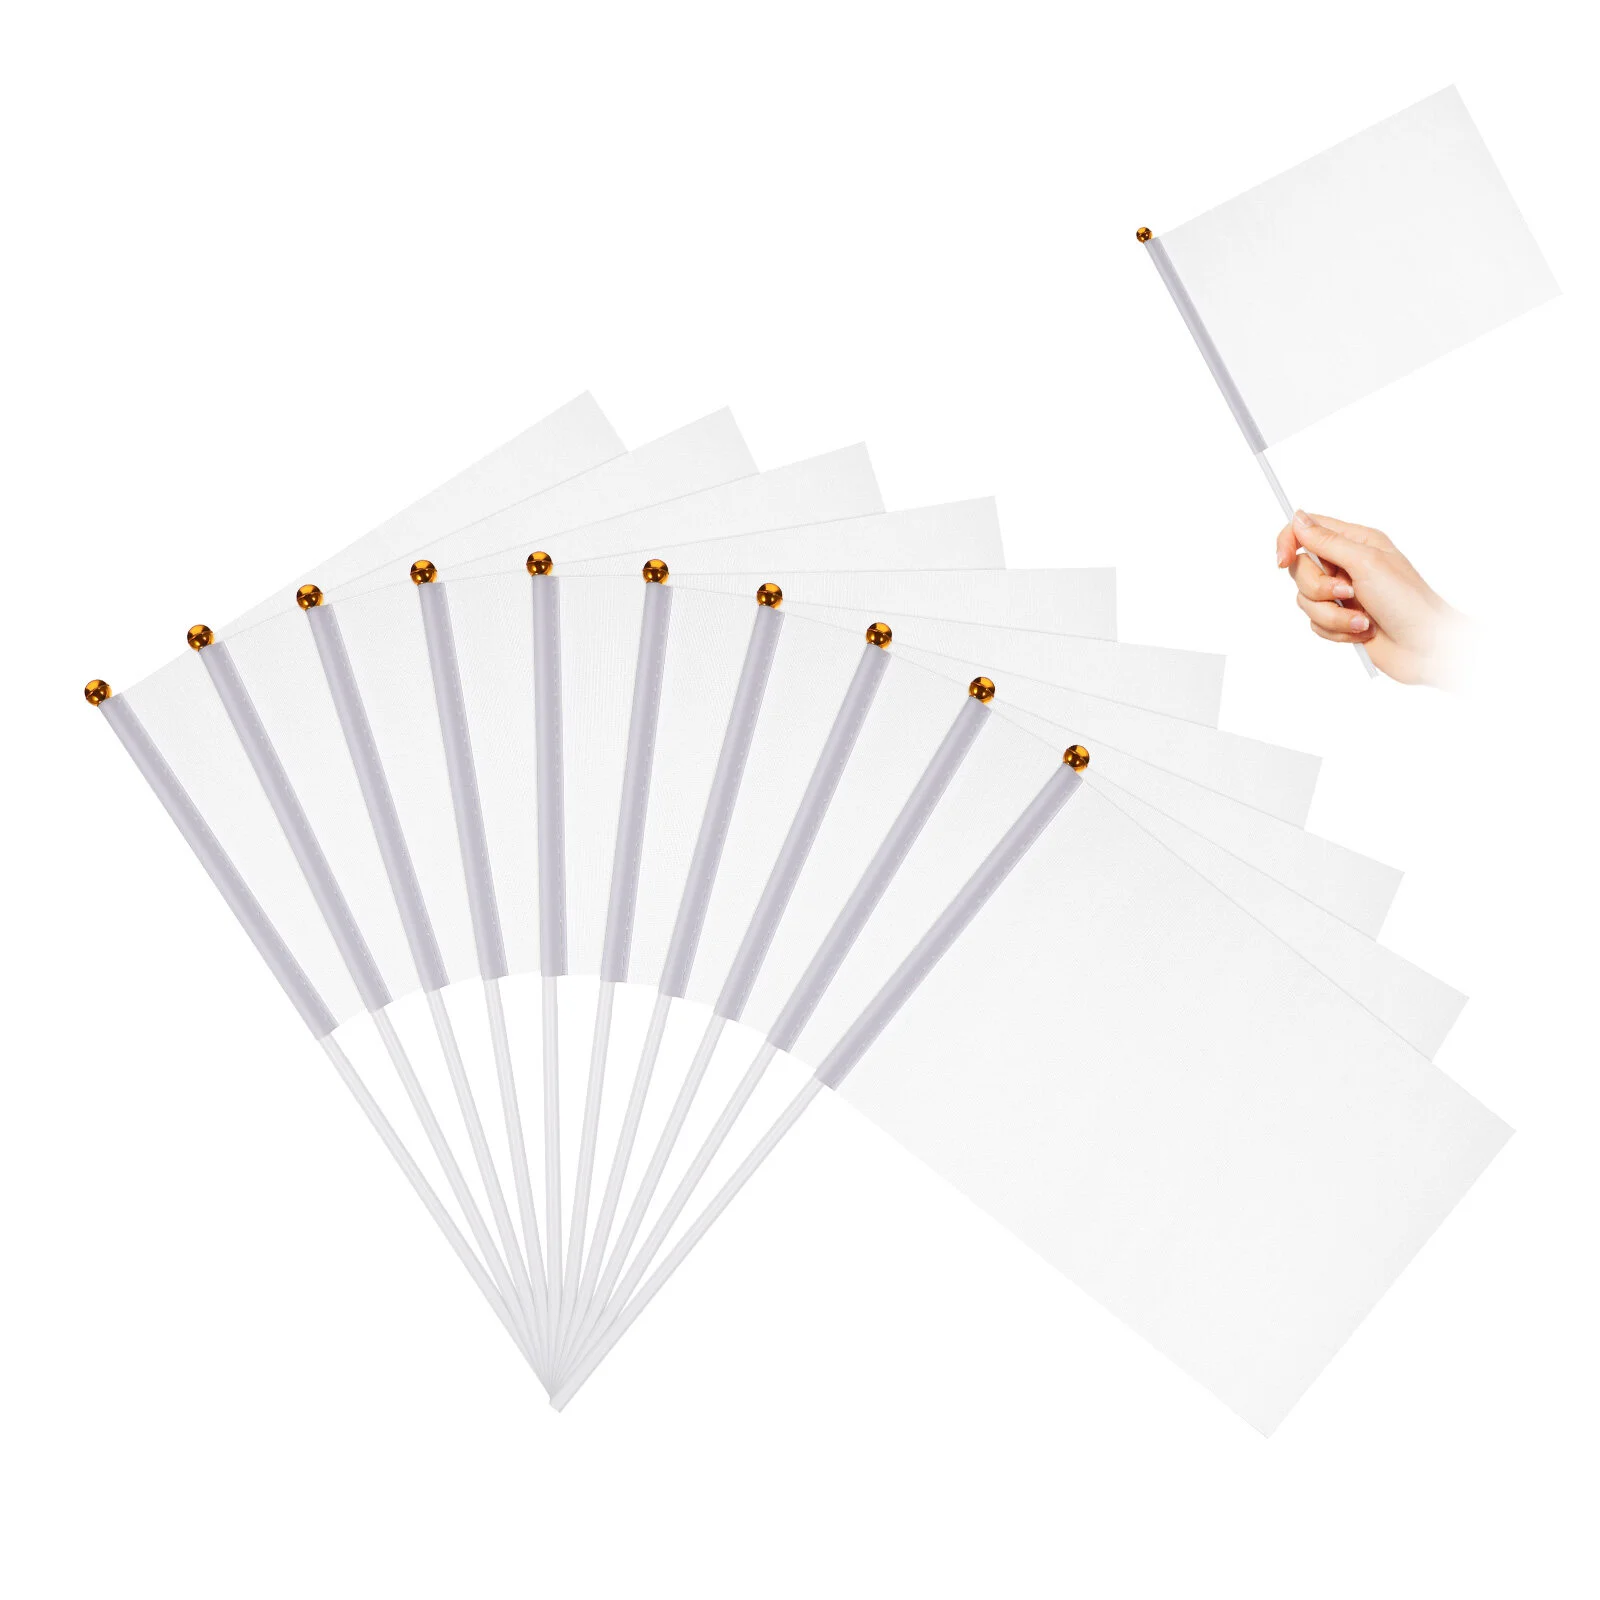 

24pcs White Flags Hand Held Flags Hand Waving Referee Flags Yard Lawn Marking Flags (White)